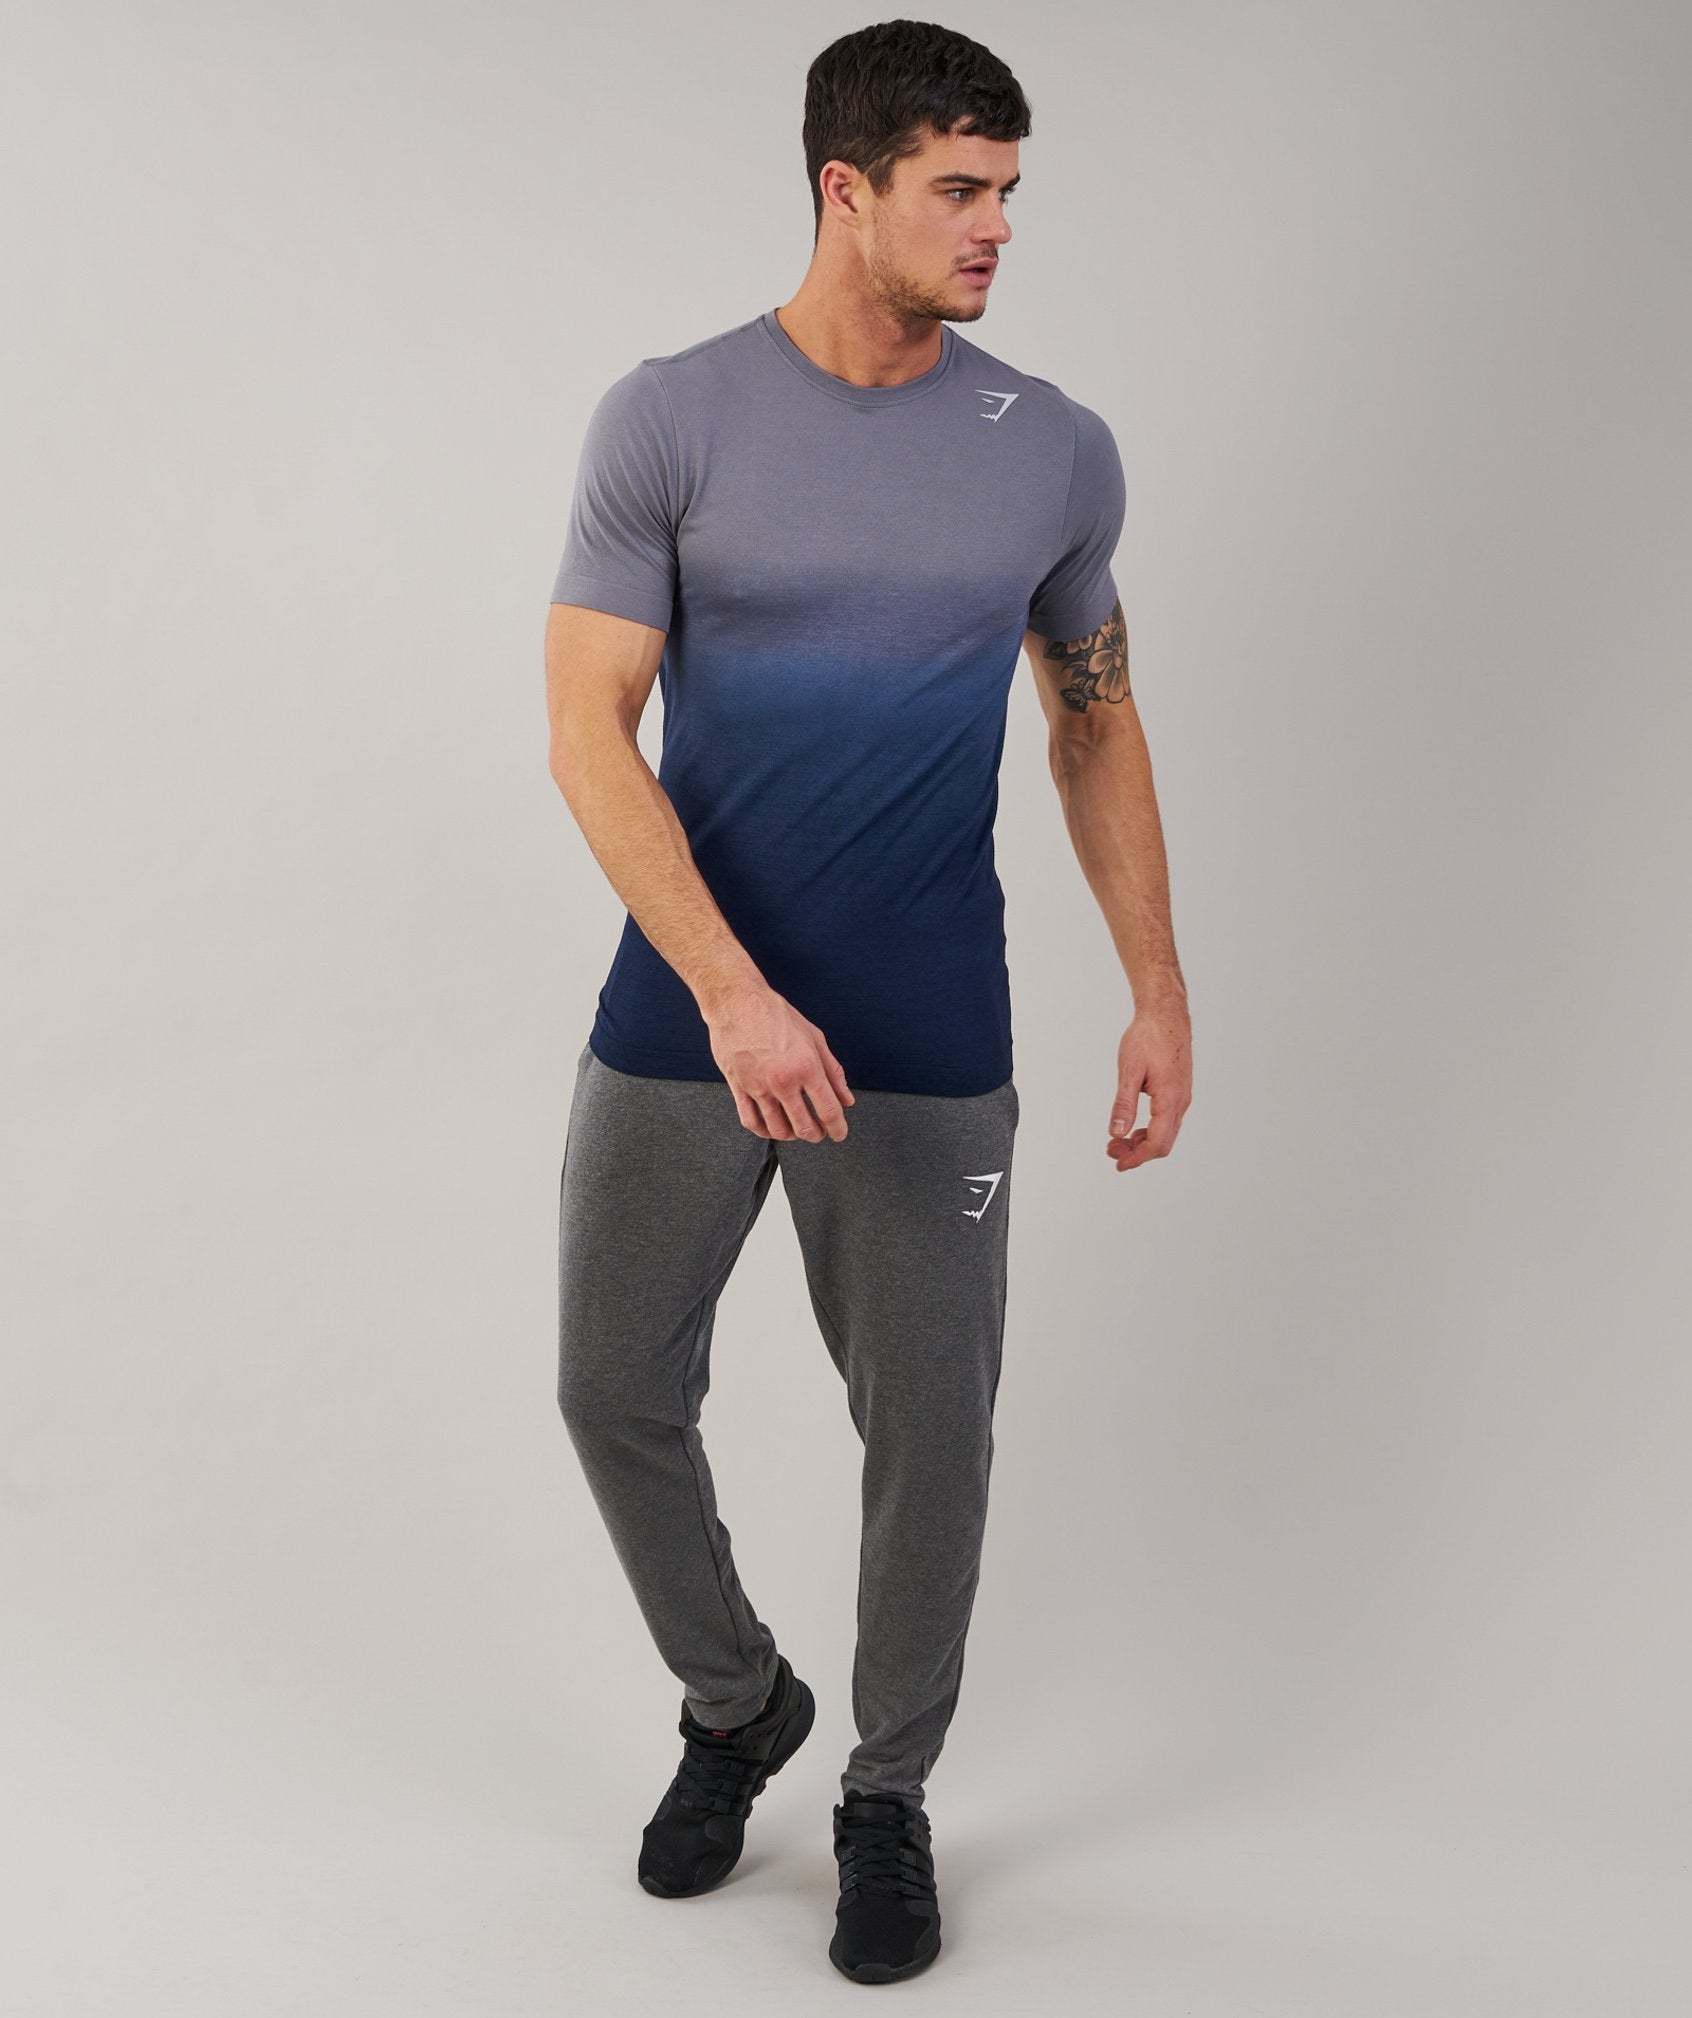 Ombre T-Shirt in Light Grey/Sapphire Blue - view 3